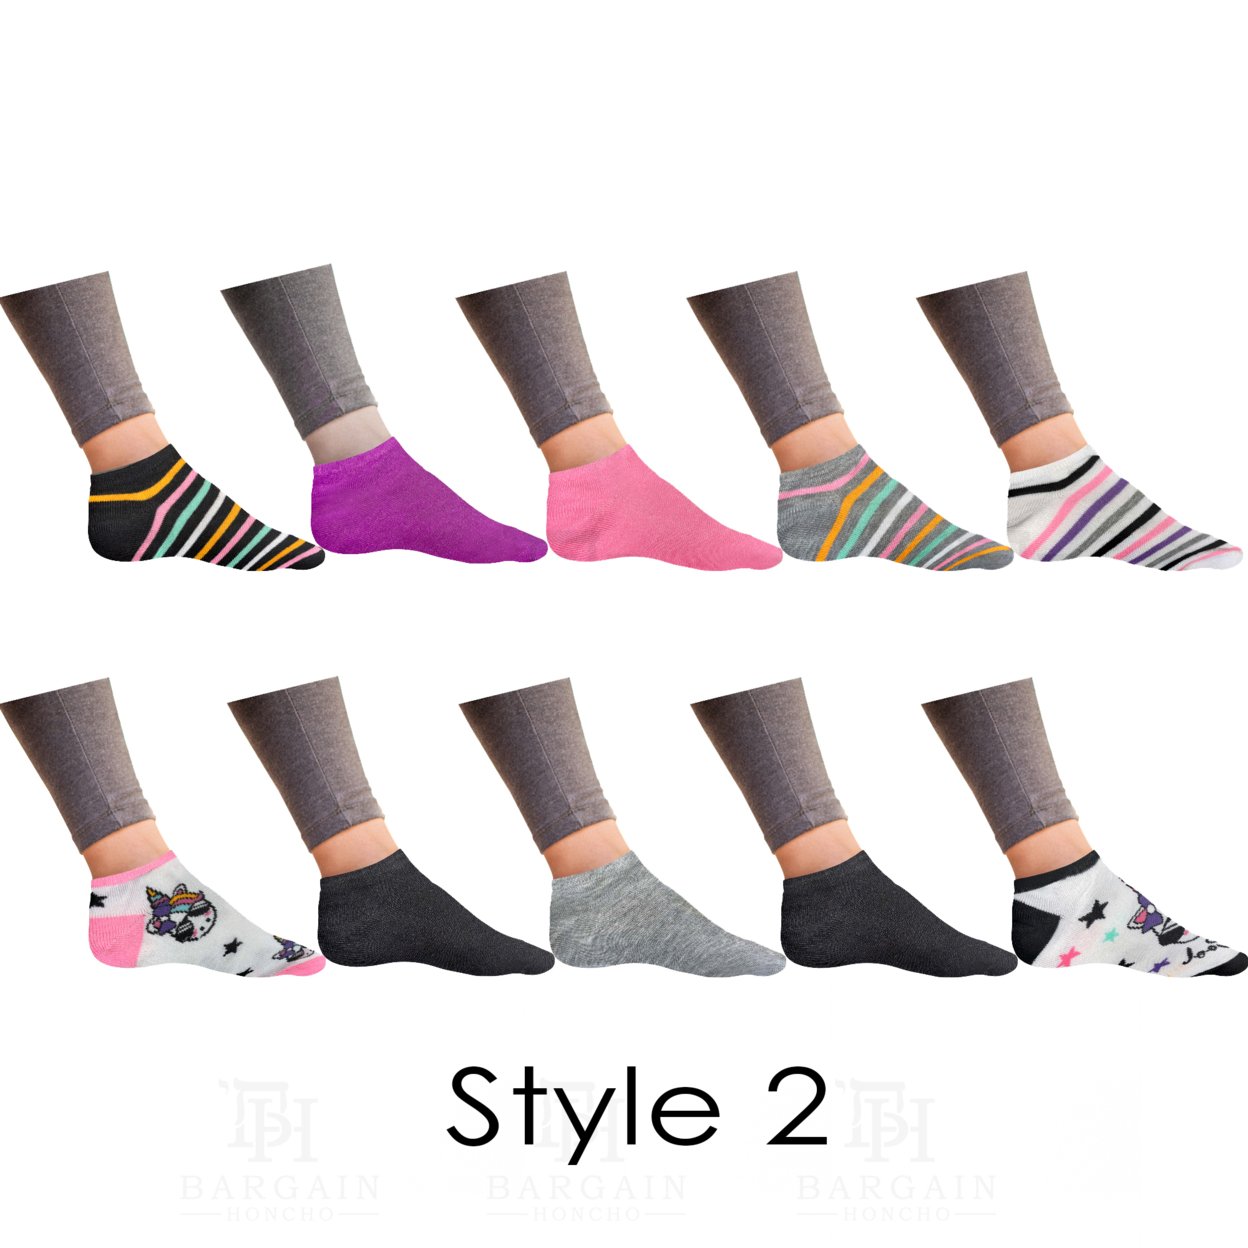 20-Pairs: Women’s Breathable Colorful Fun No Show Low Cut Ankle Socks - Assorted